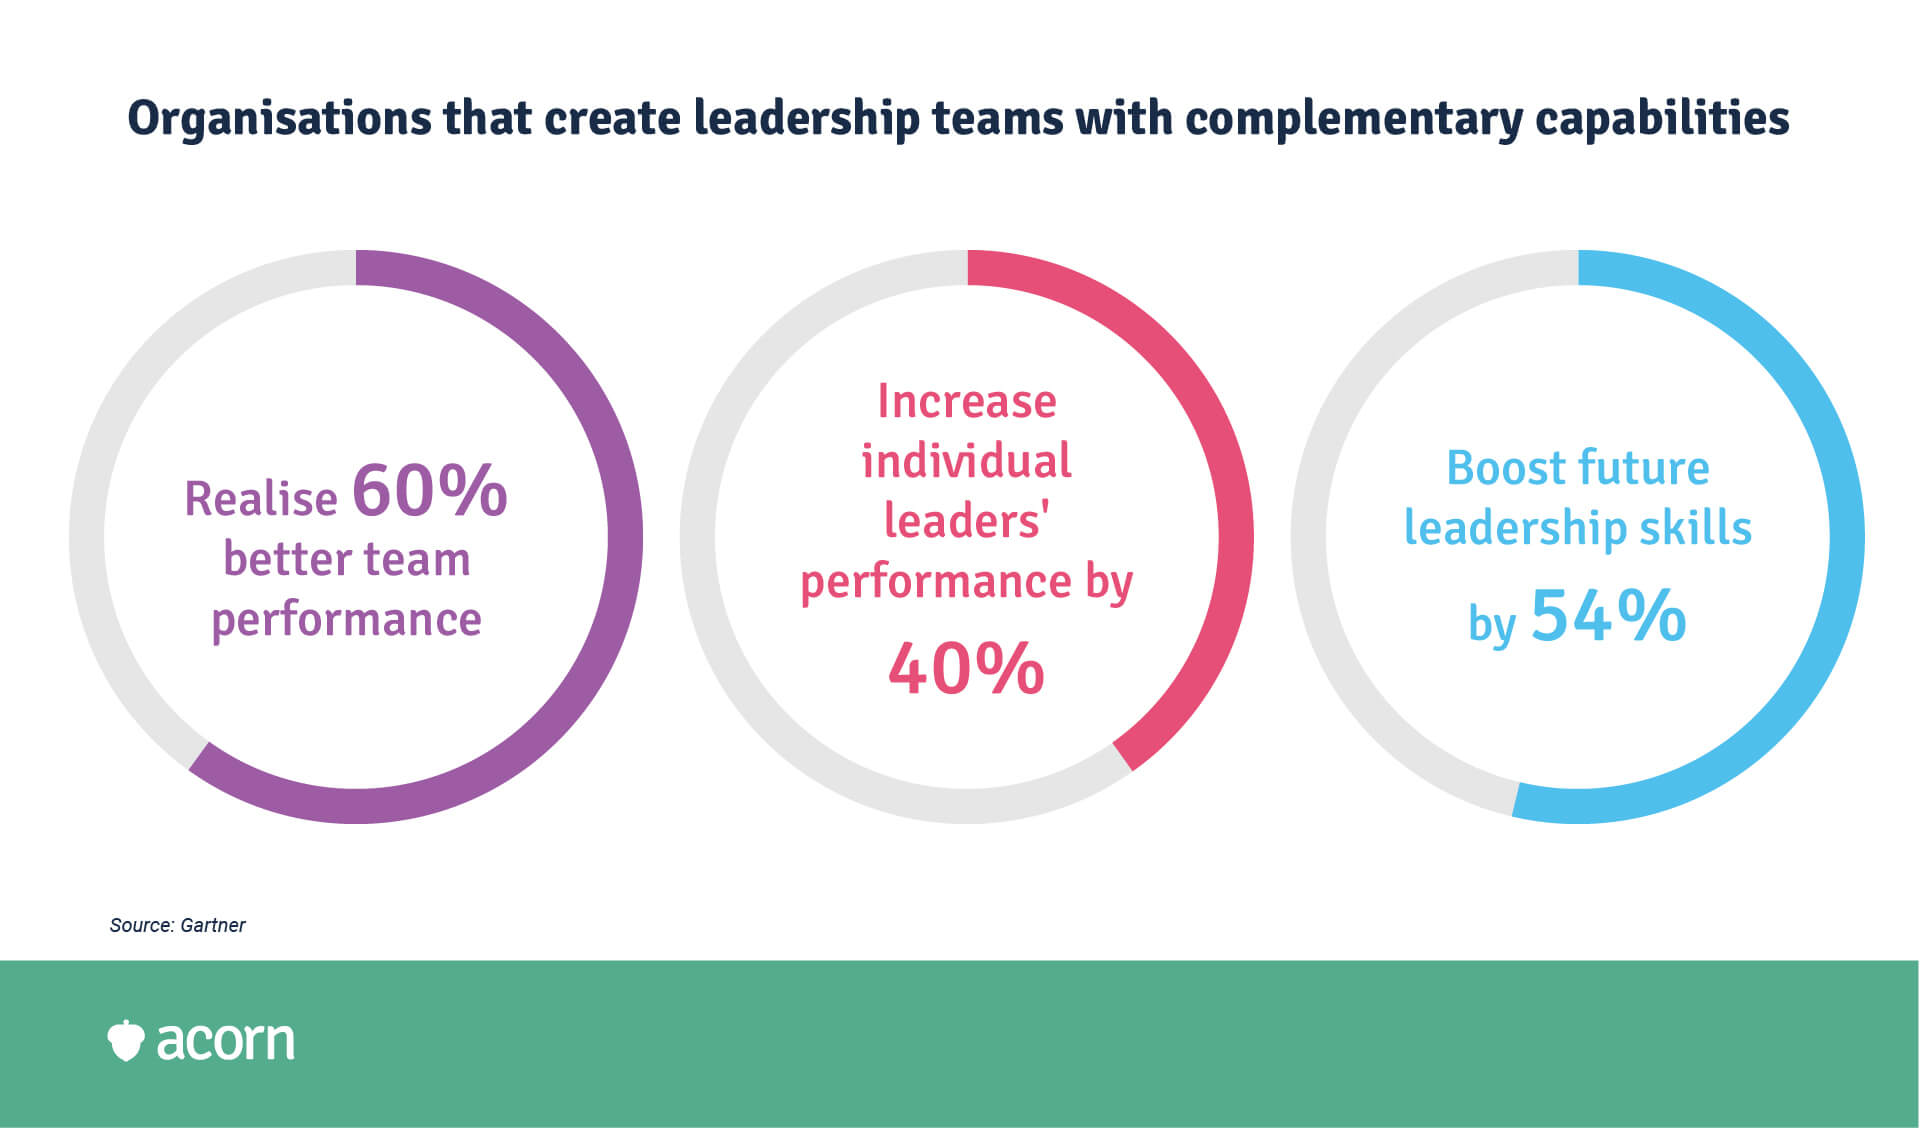 infographic showing business benefit statistics of complementary leadership team capabilities